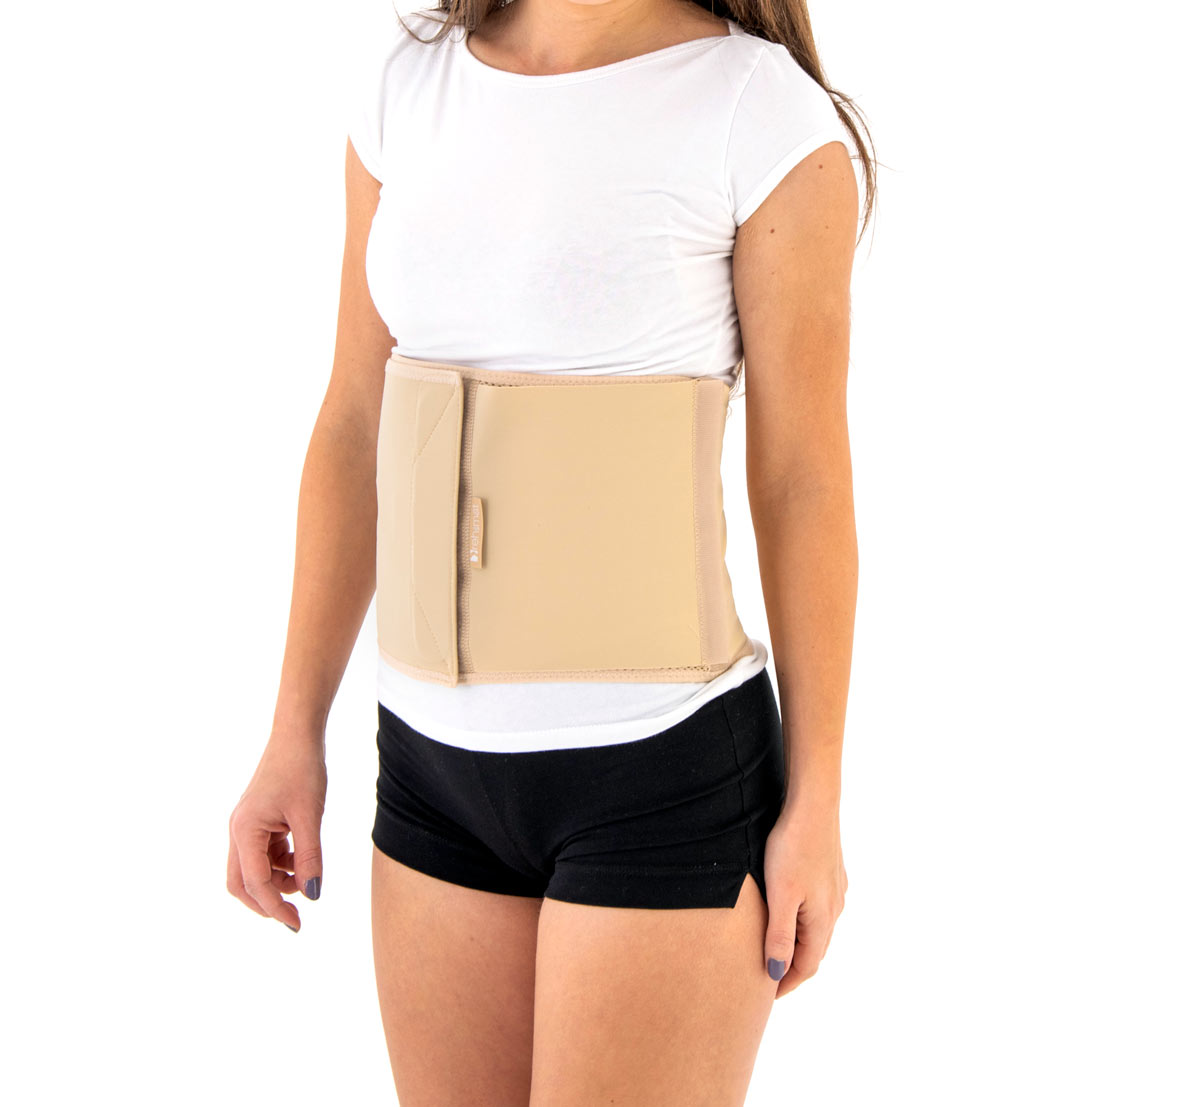 Torso support EB-LK-01/TLSO BEIGE  Reh4Mat – lower limb orthosis and braces  - Manufacturer of modern orthopaedic devices